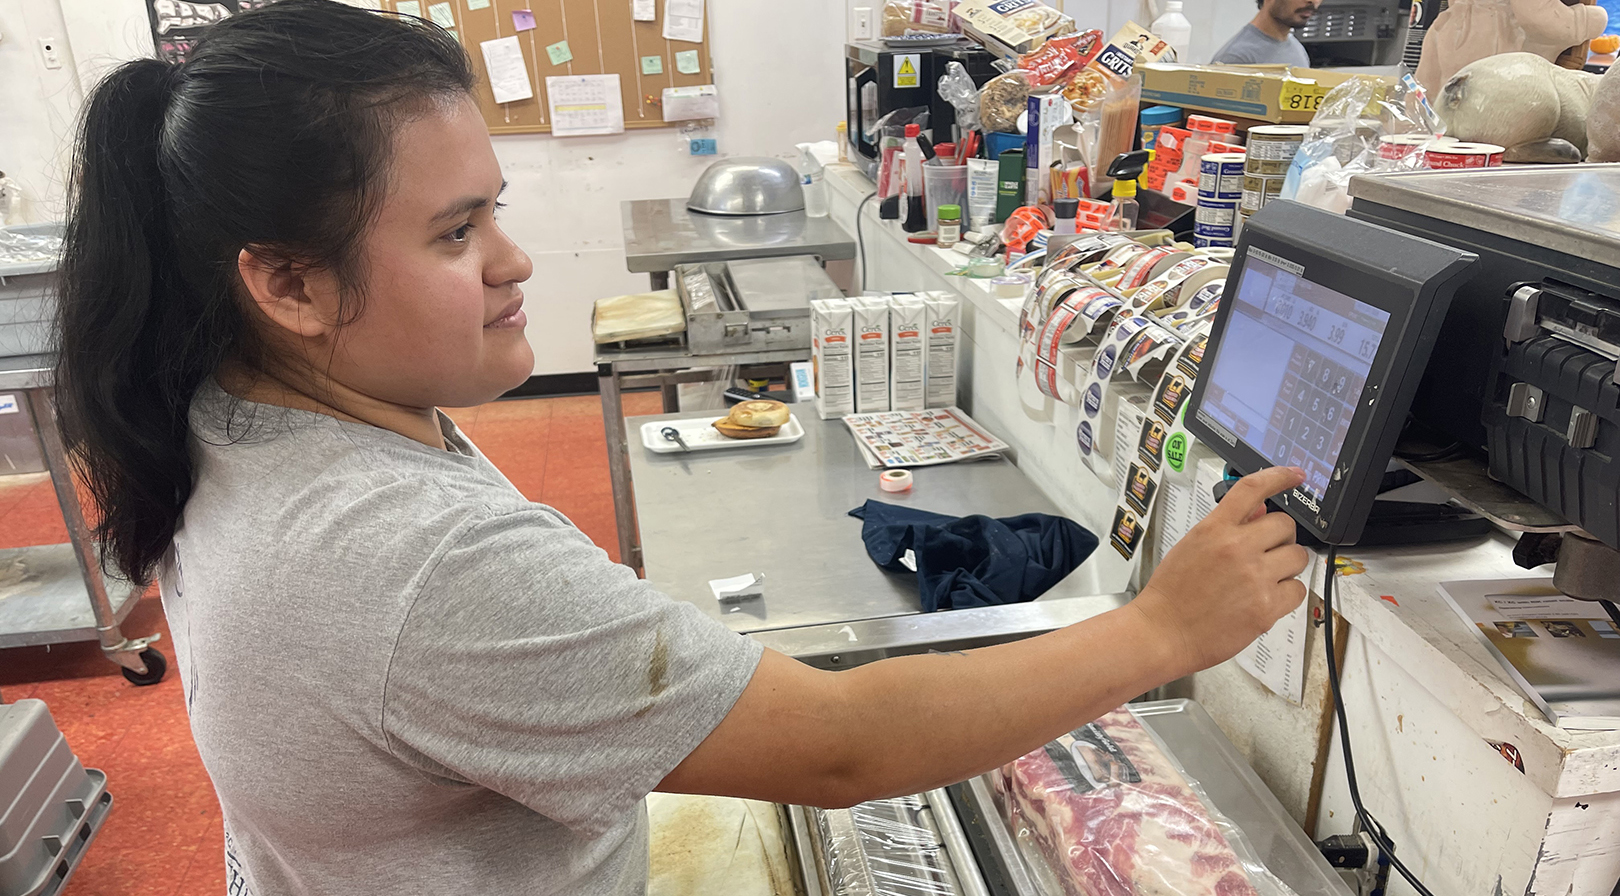 A woman weighing ribs on a scale behind a meat counter